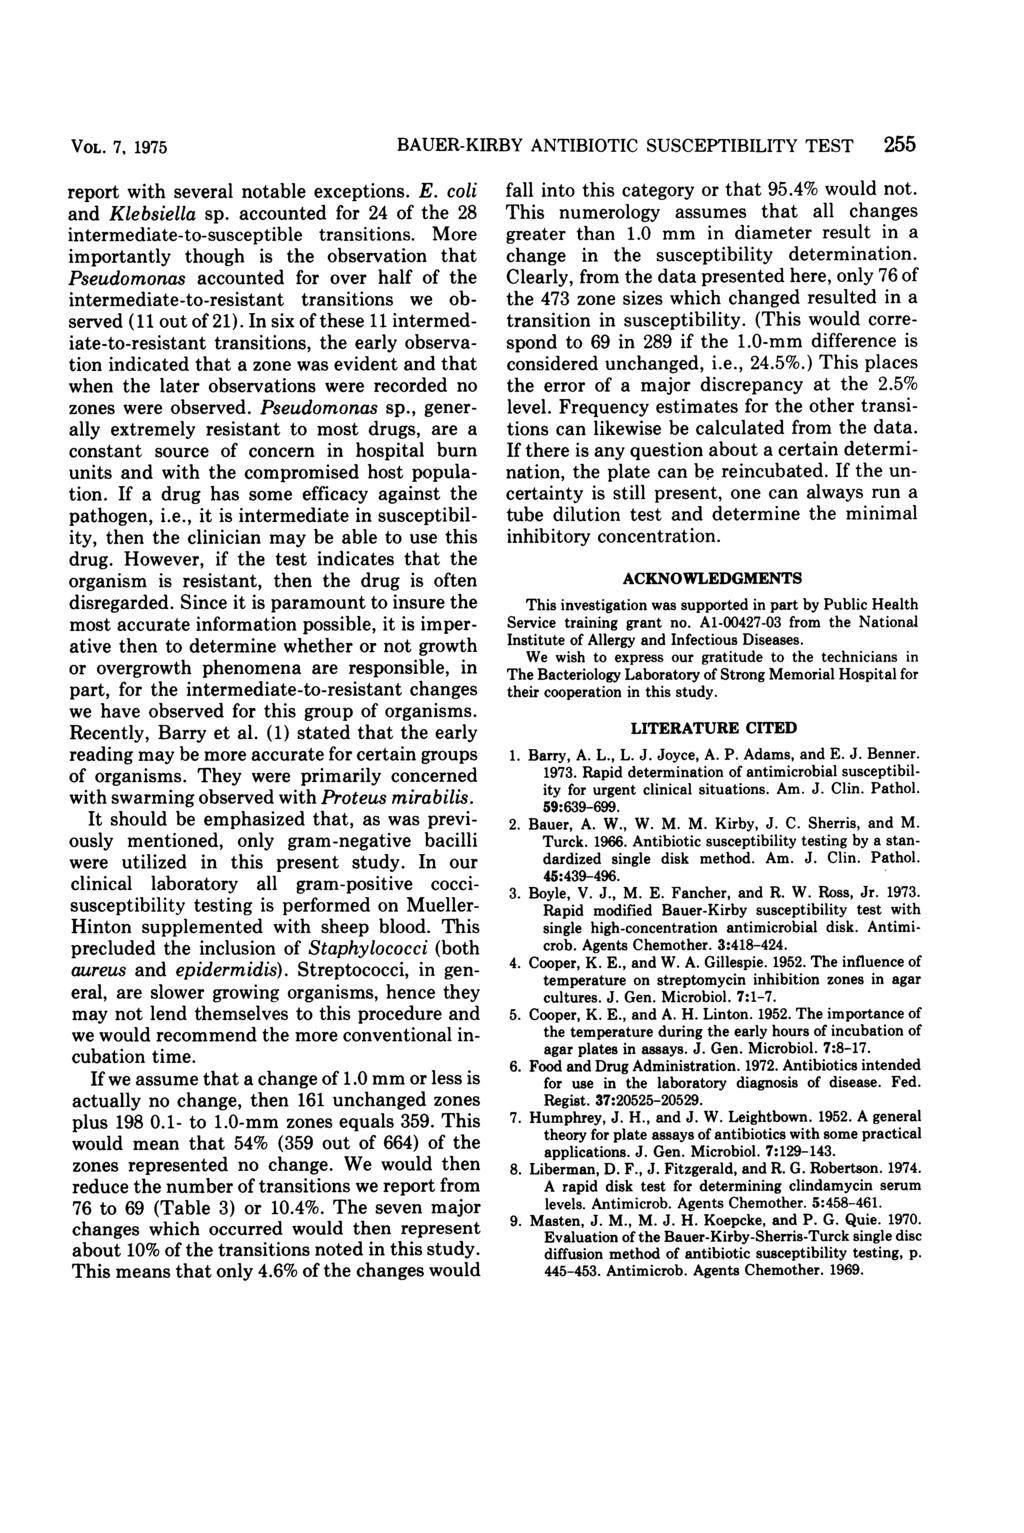 VOL. 7, 1975 BAUER-KIRBY ANTIBIOTIC SUSCEPTIBILITY TEST 255 report with several notable exceptions. E. coli and Klebsiella sp. accounted for 24 of the 28 intermediate-to-susceptible transitions.